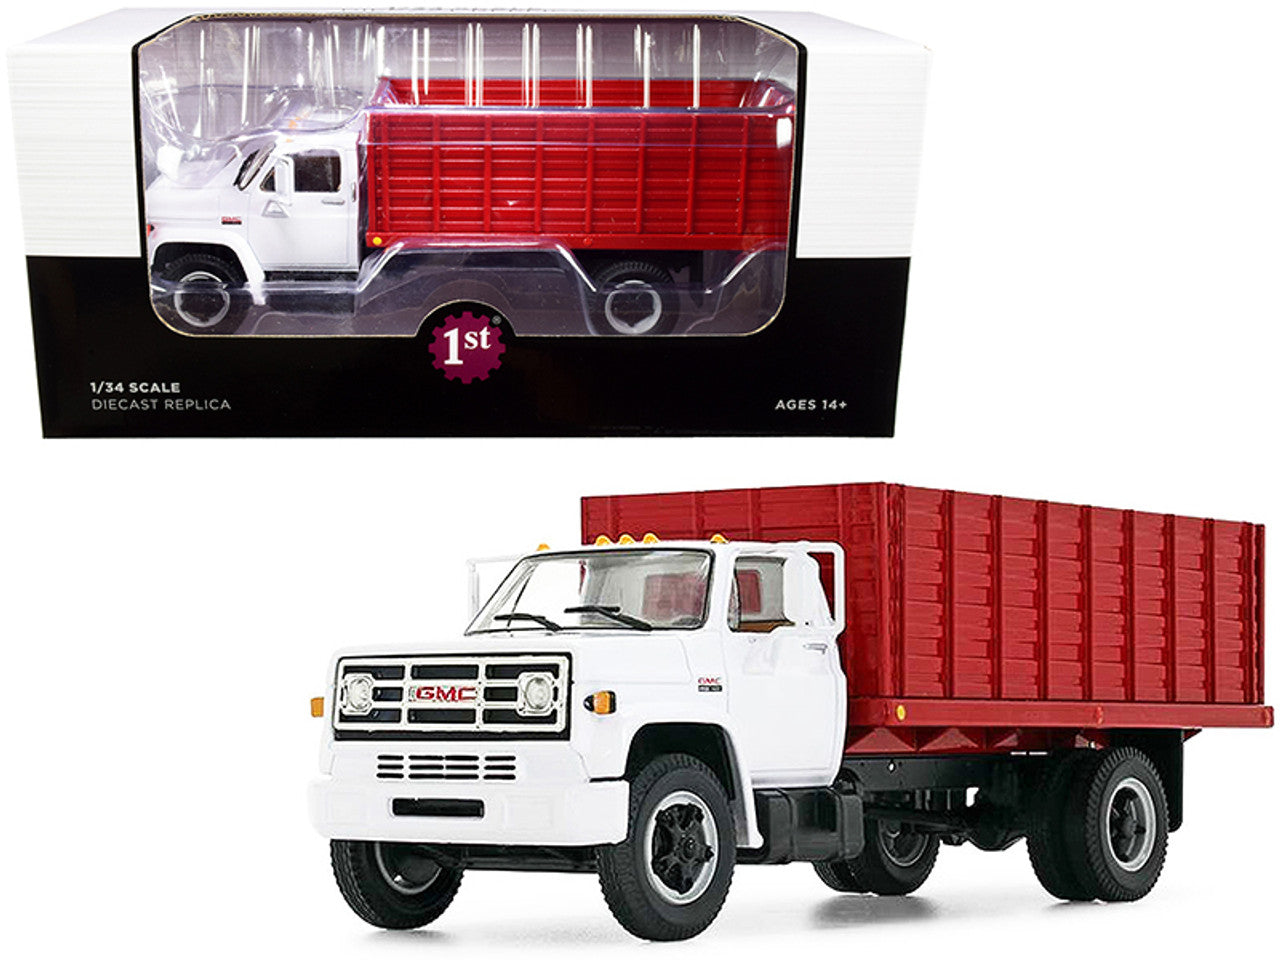 Chevrolet C65 Grain Truck Red and White 1:34 Scale Diecast